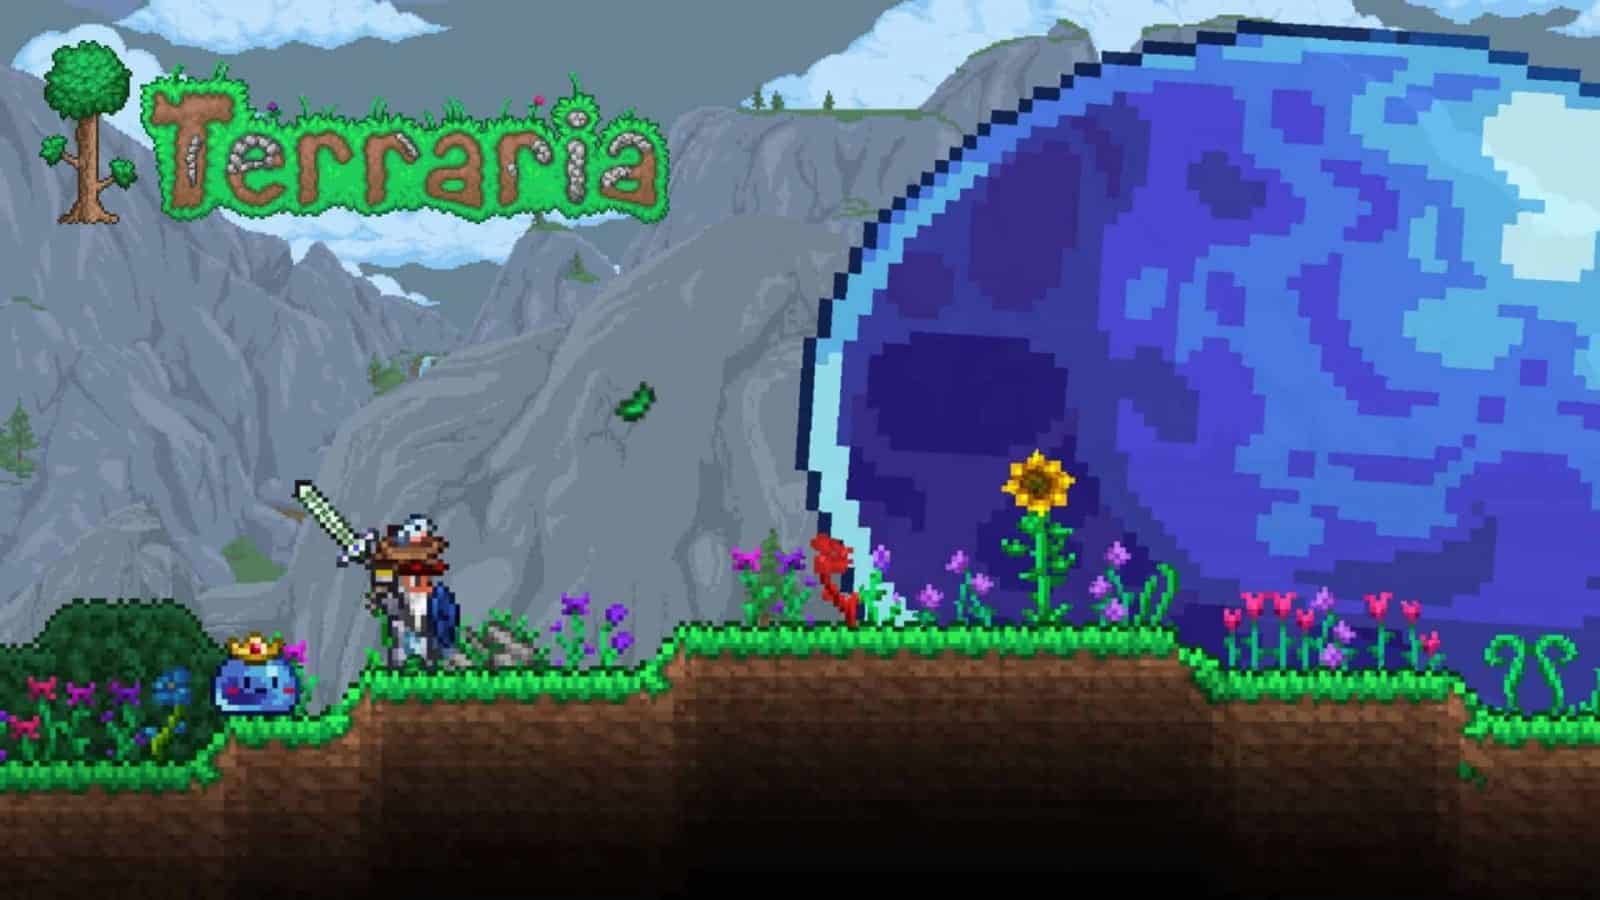 An image of Terraria gameplay with the logo in the corner